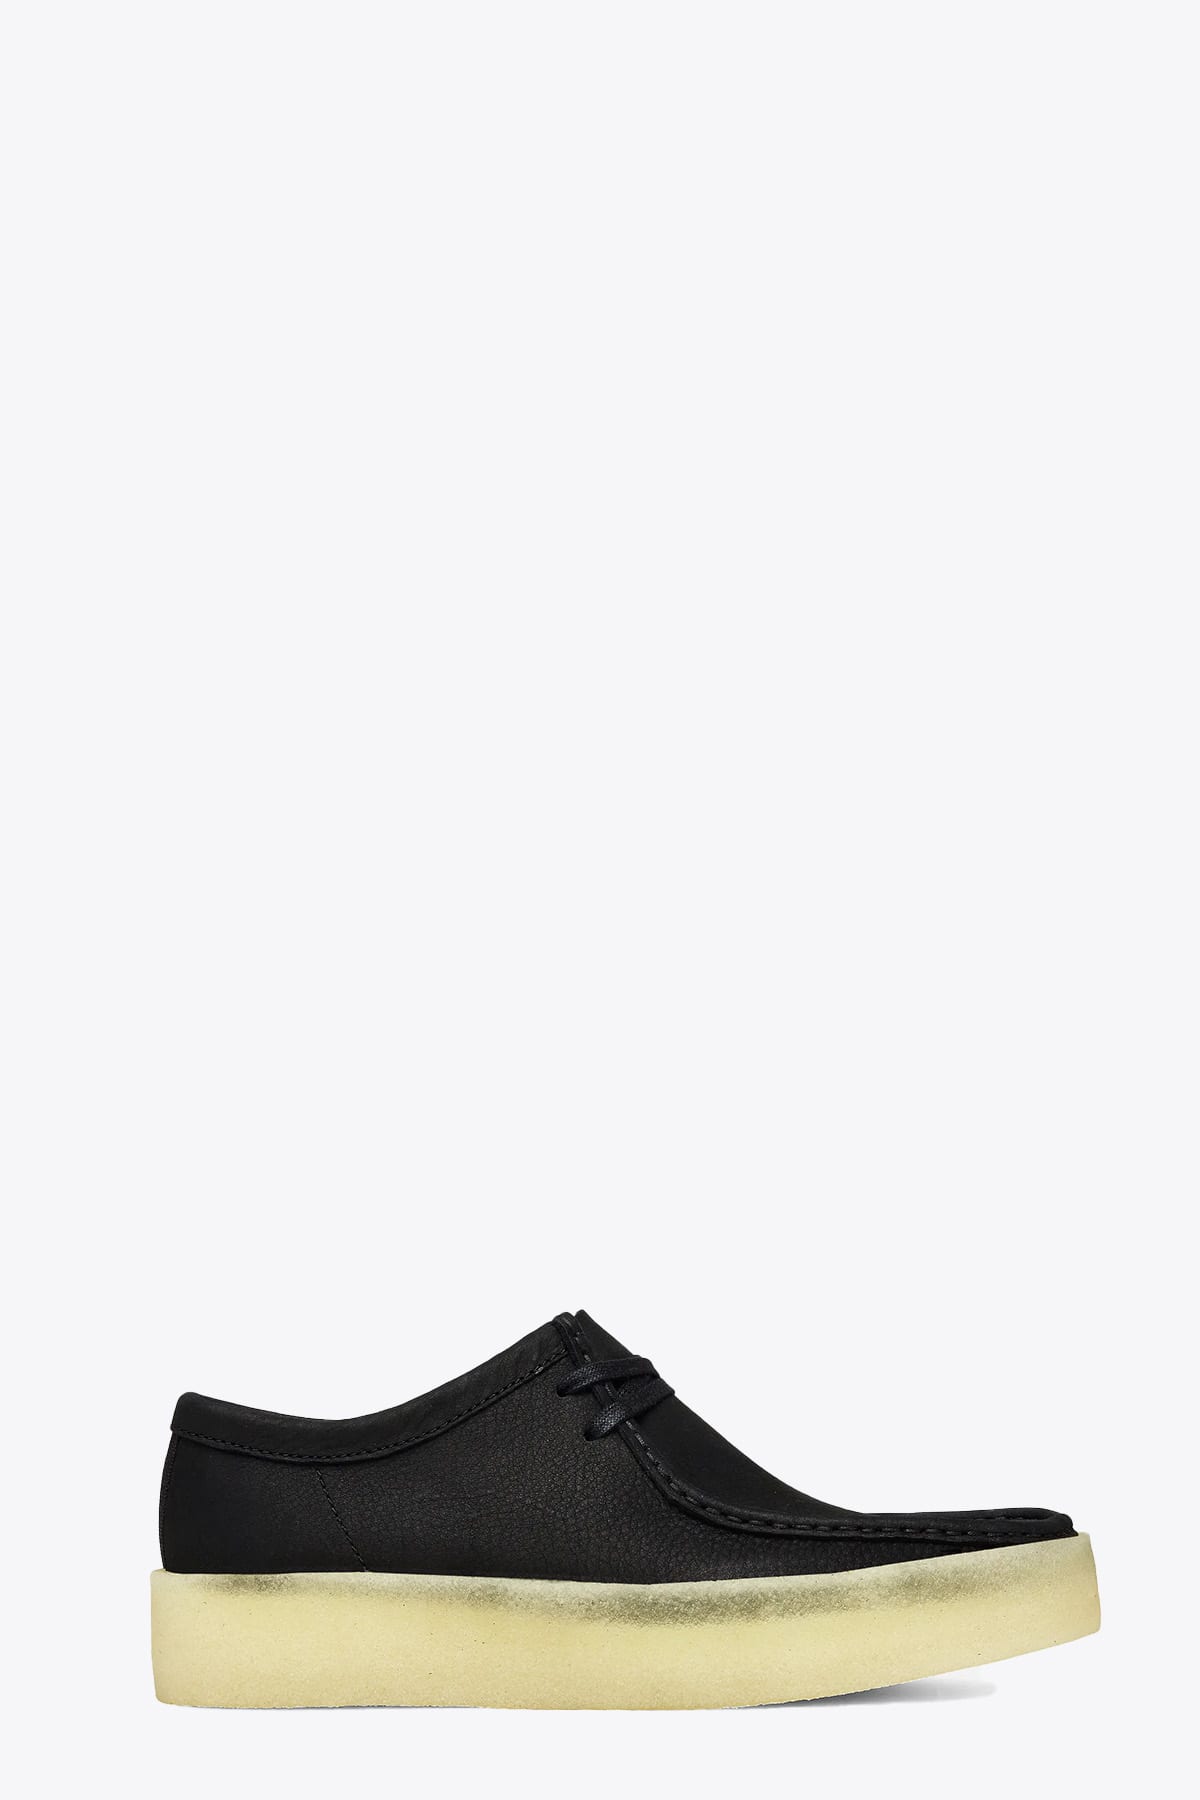 Clarks Nero Black nubuk leather loafer - Wallabe cup